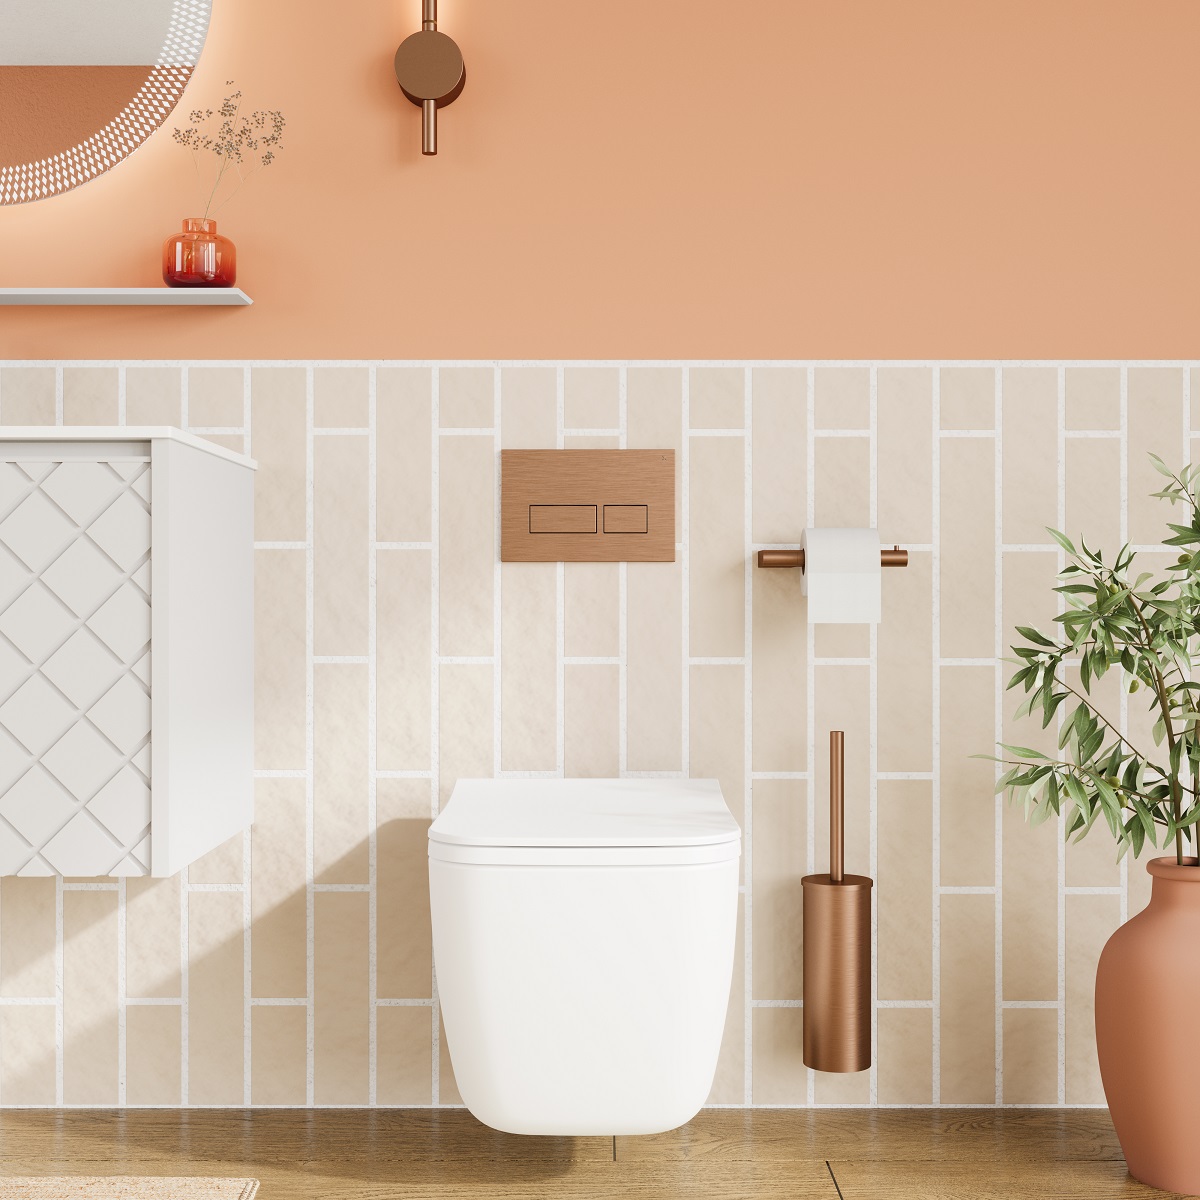 wall hung toilet in bathroom with peach and beige walls and brass accessories